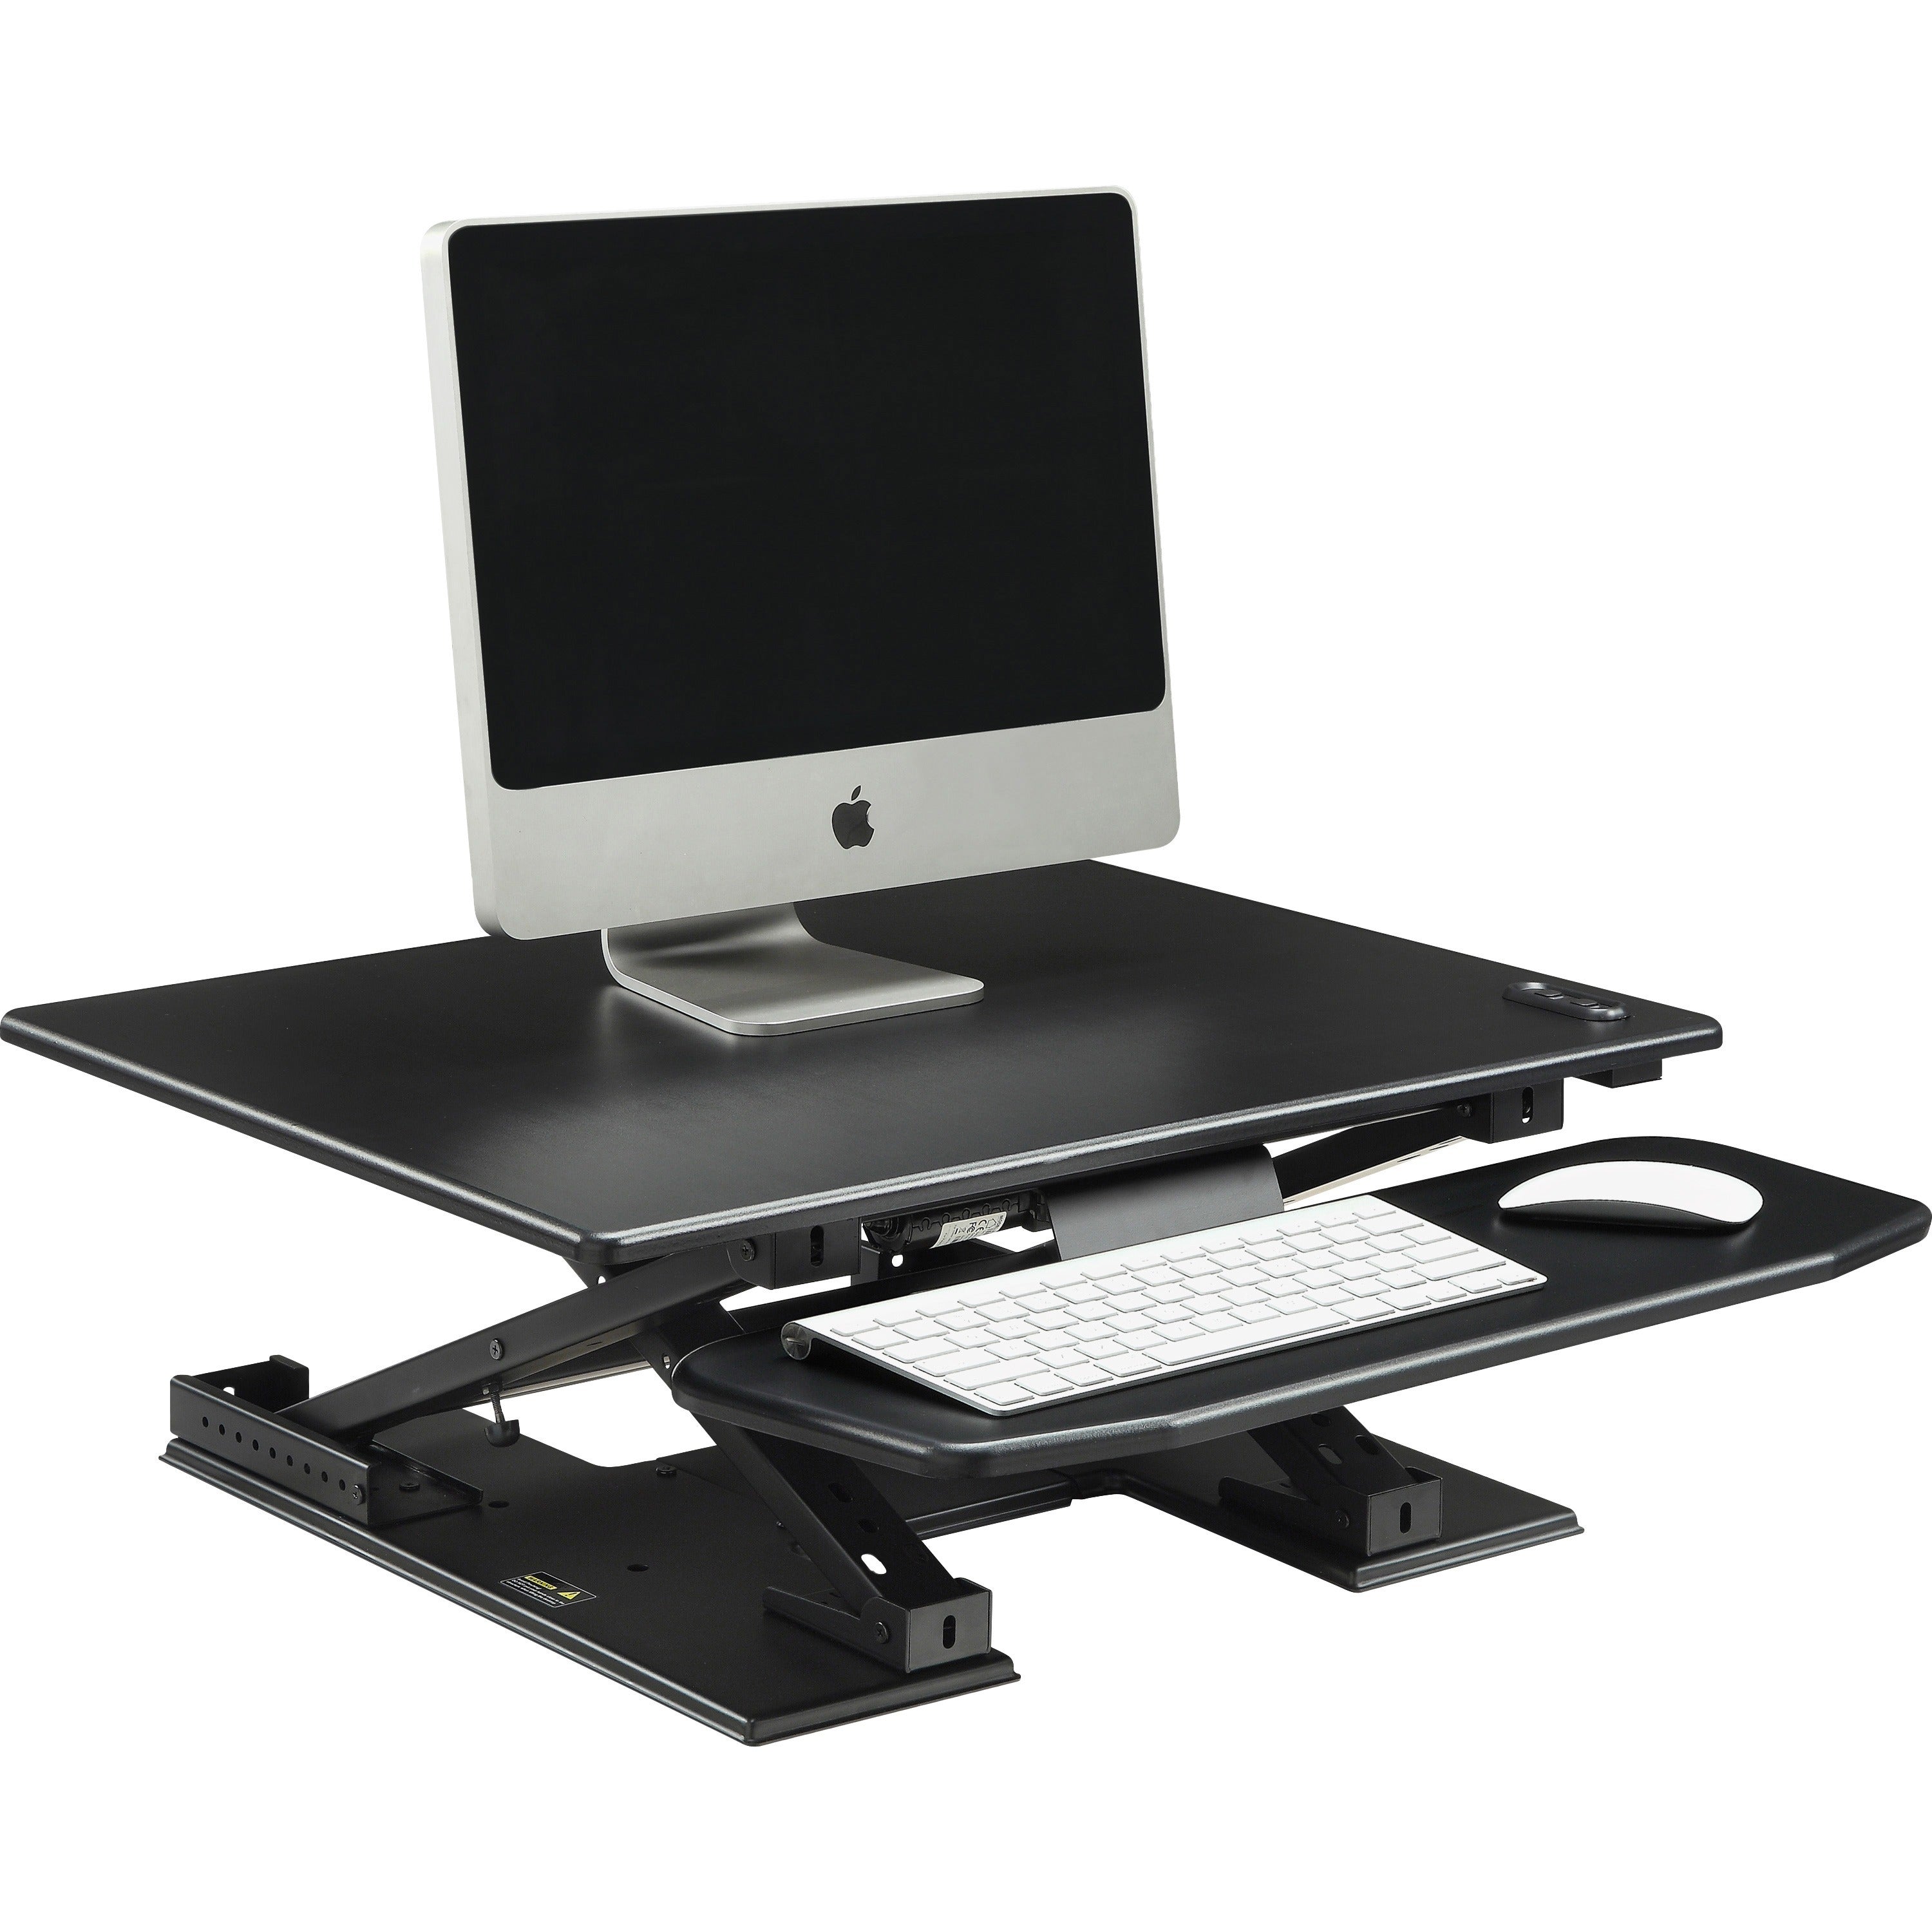 lorell-electric-desk-riser-with-keyboard-tray-up-to-33-screen-support-flat-panel-display-type-supported-171-height-x-288-width-x-358-depth-desktop-aluminum-black_llr99552 - 1